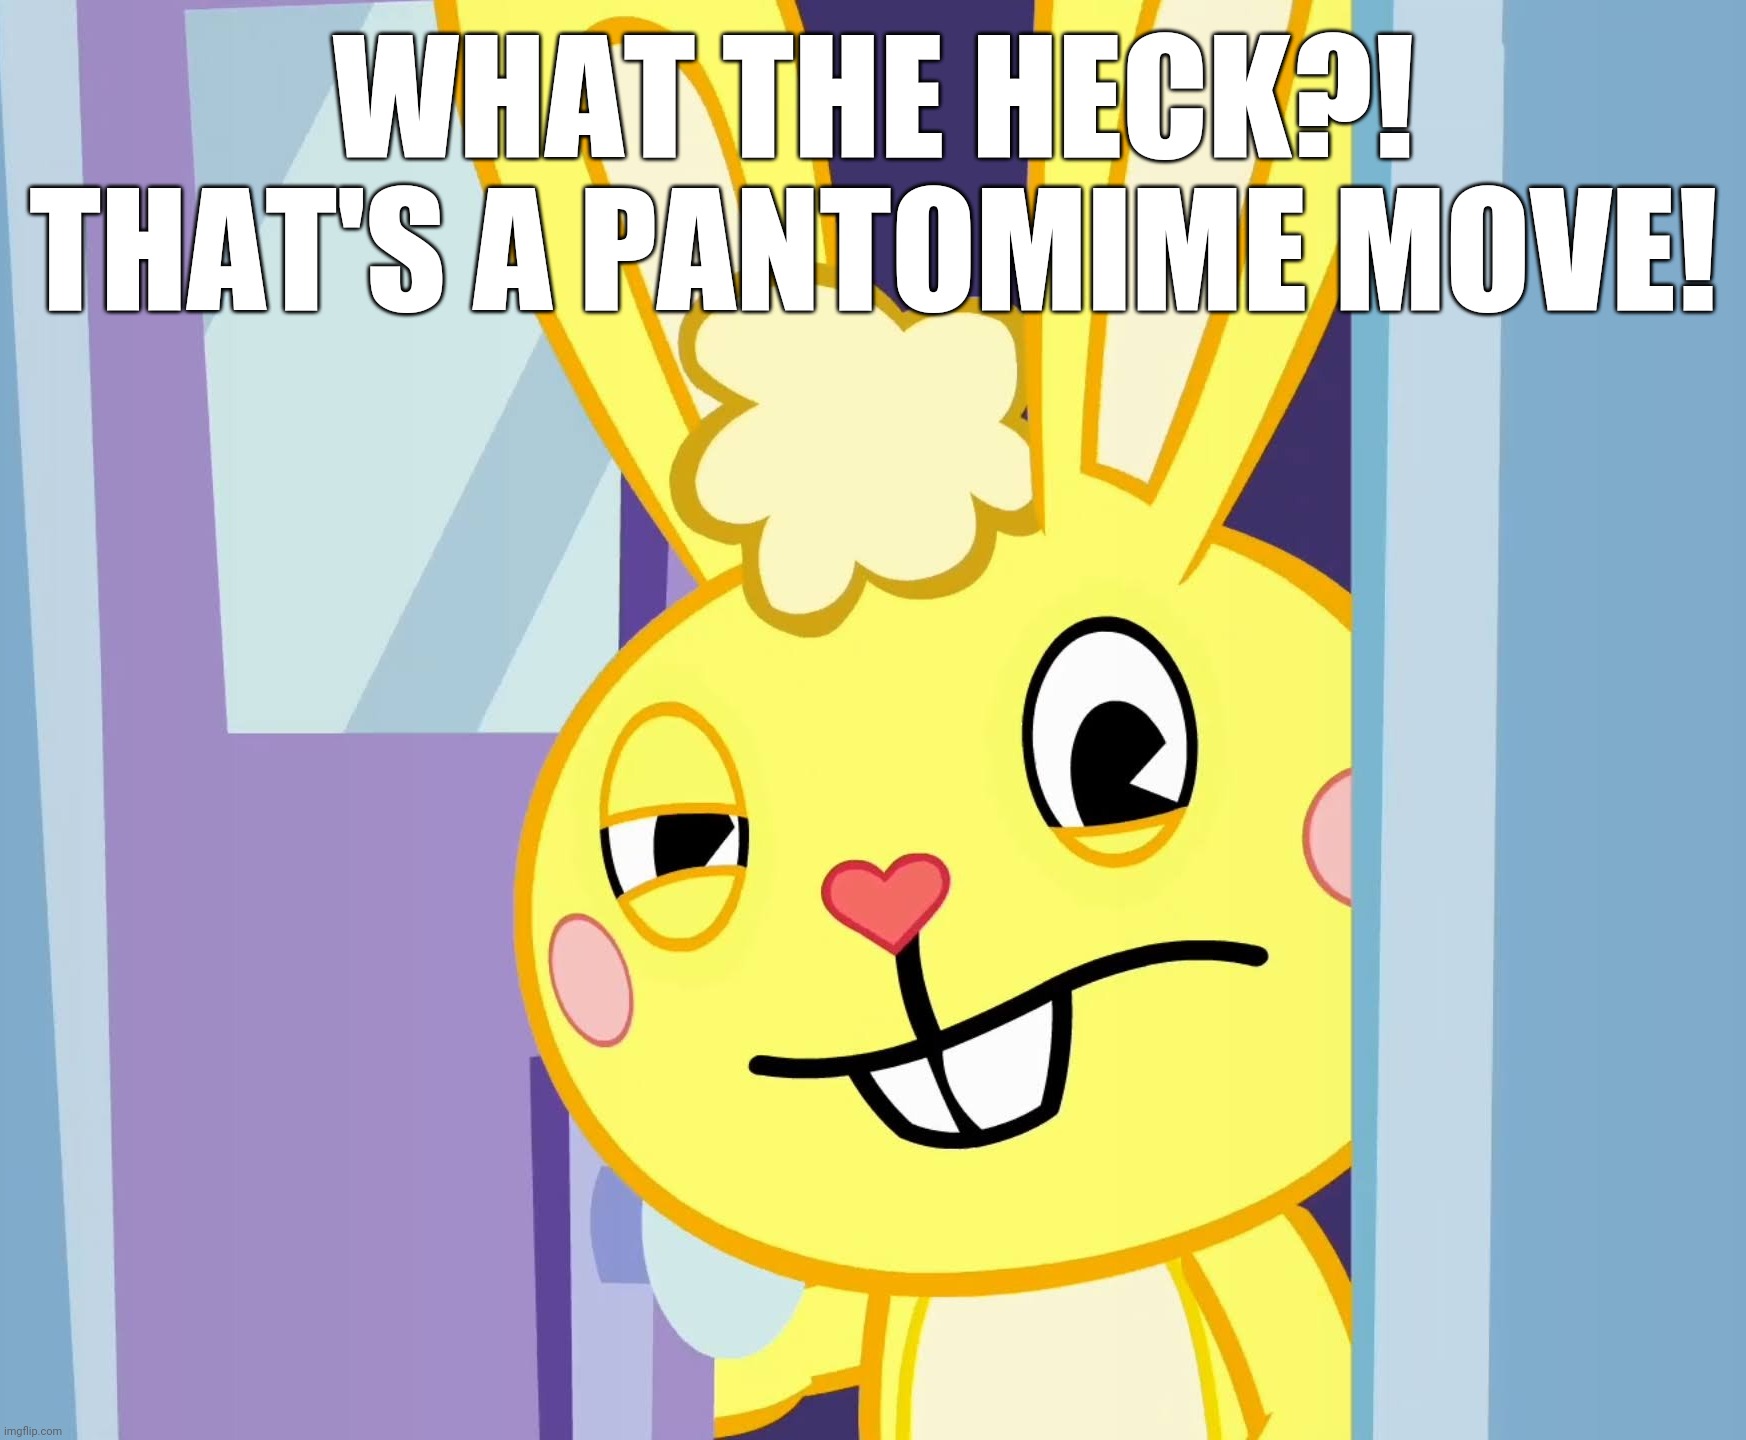 WHAT THE HECK?! THAT'S A PANTOMIME MOVE! | made w/ Imgflip meme maker